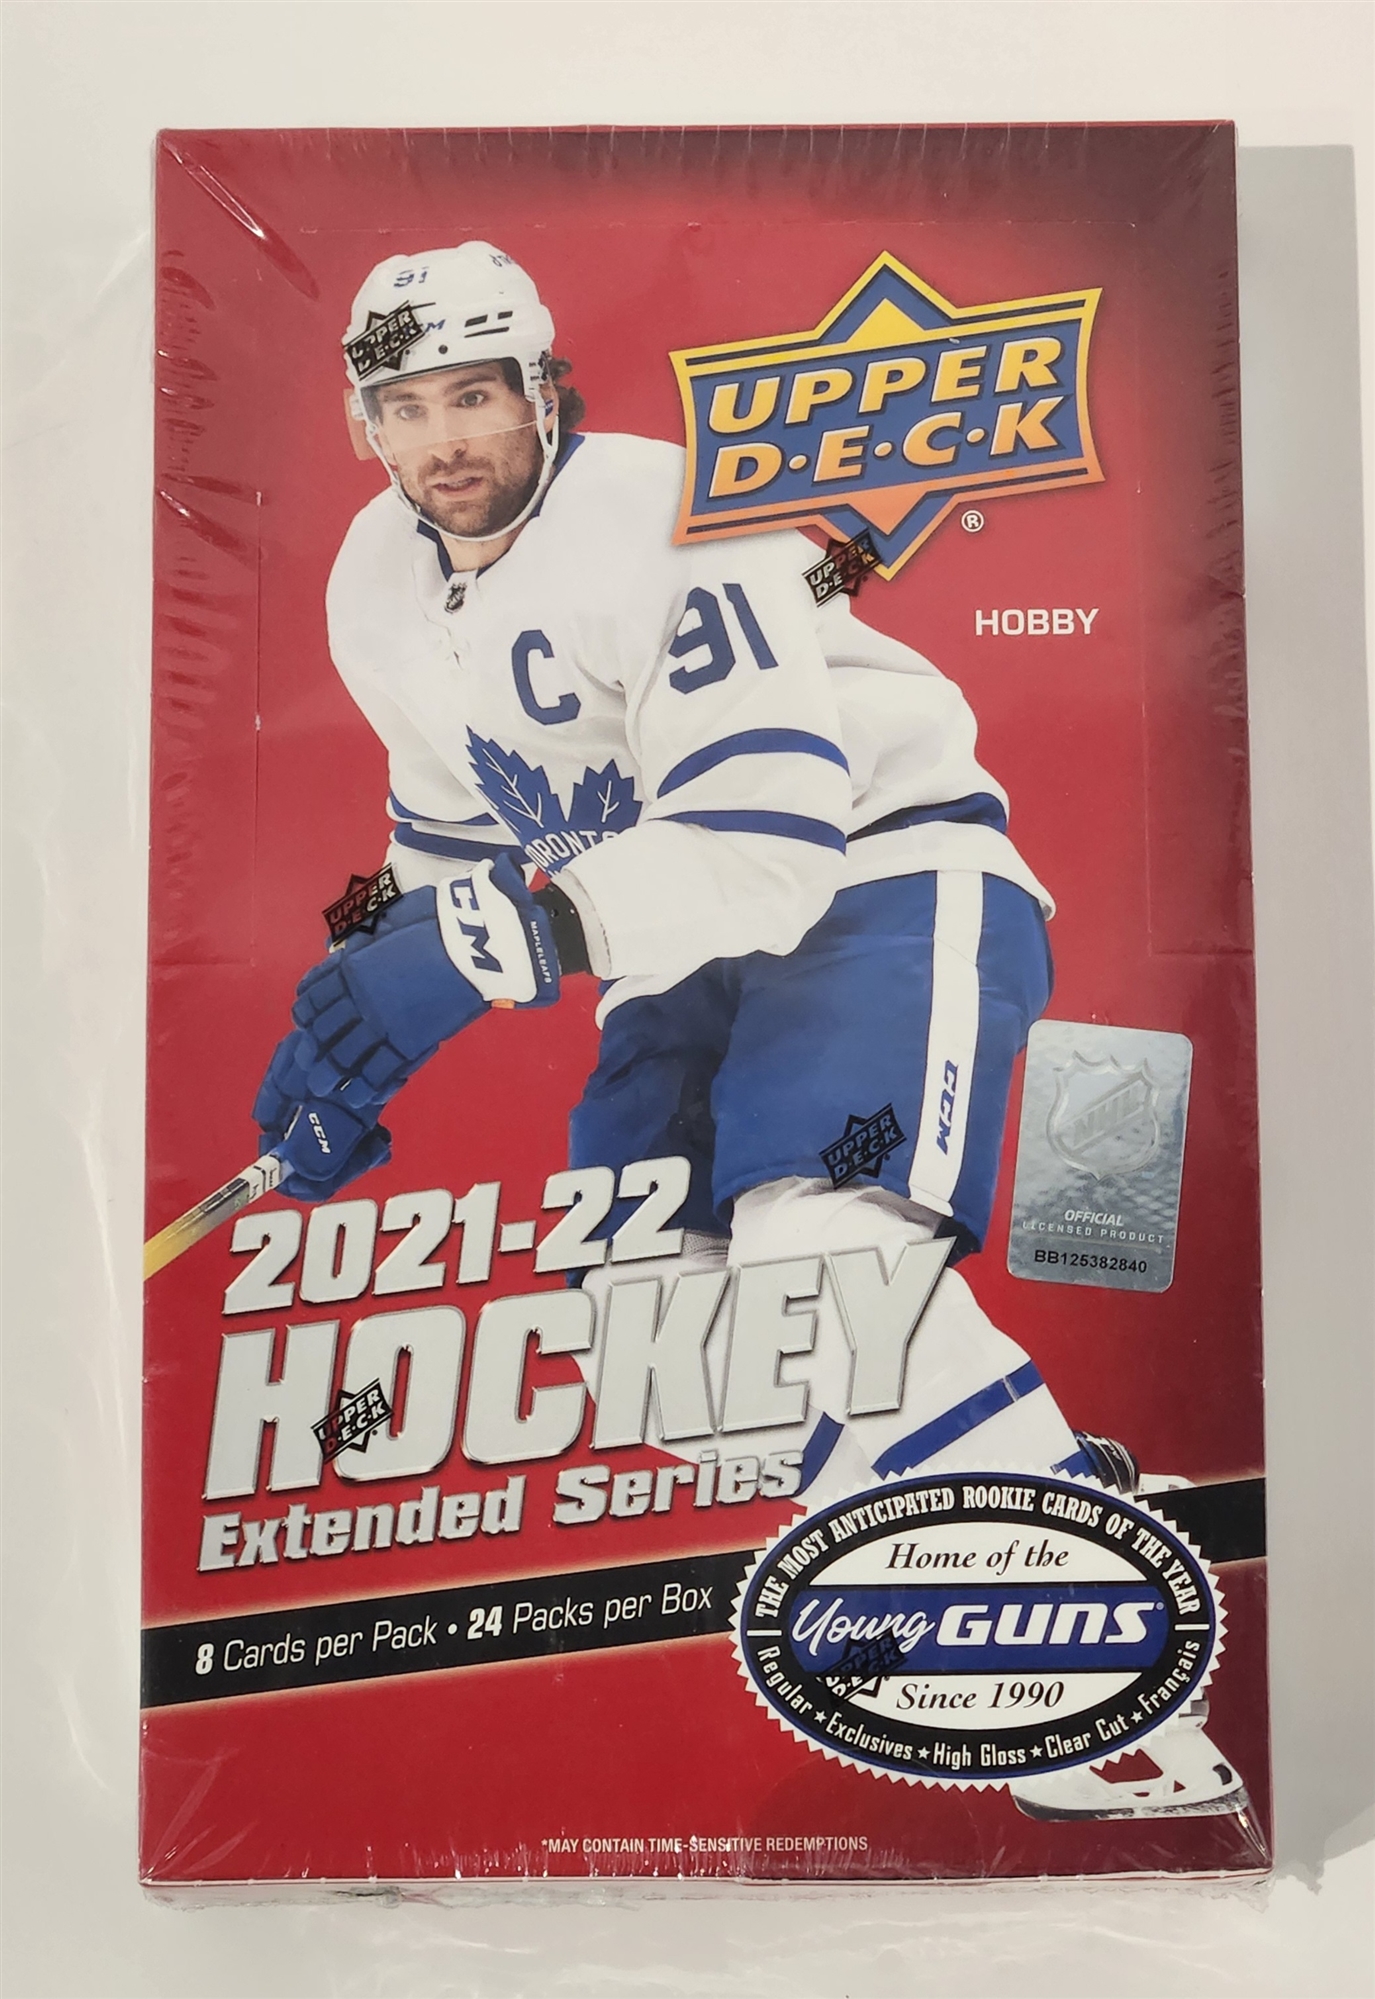 2021-22 Upper Deck Extended Series NHL Hockey Sealed Trading Card Box